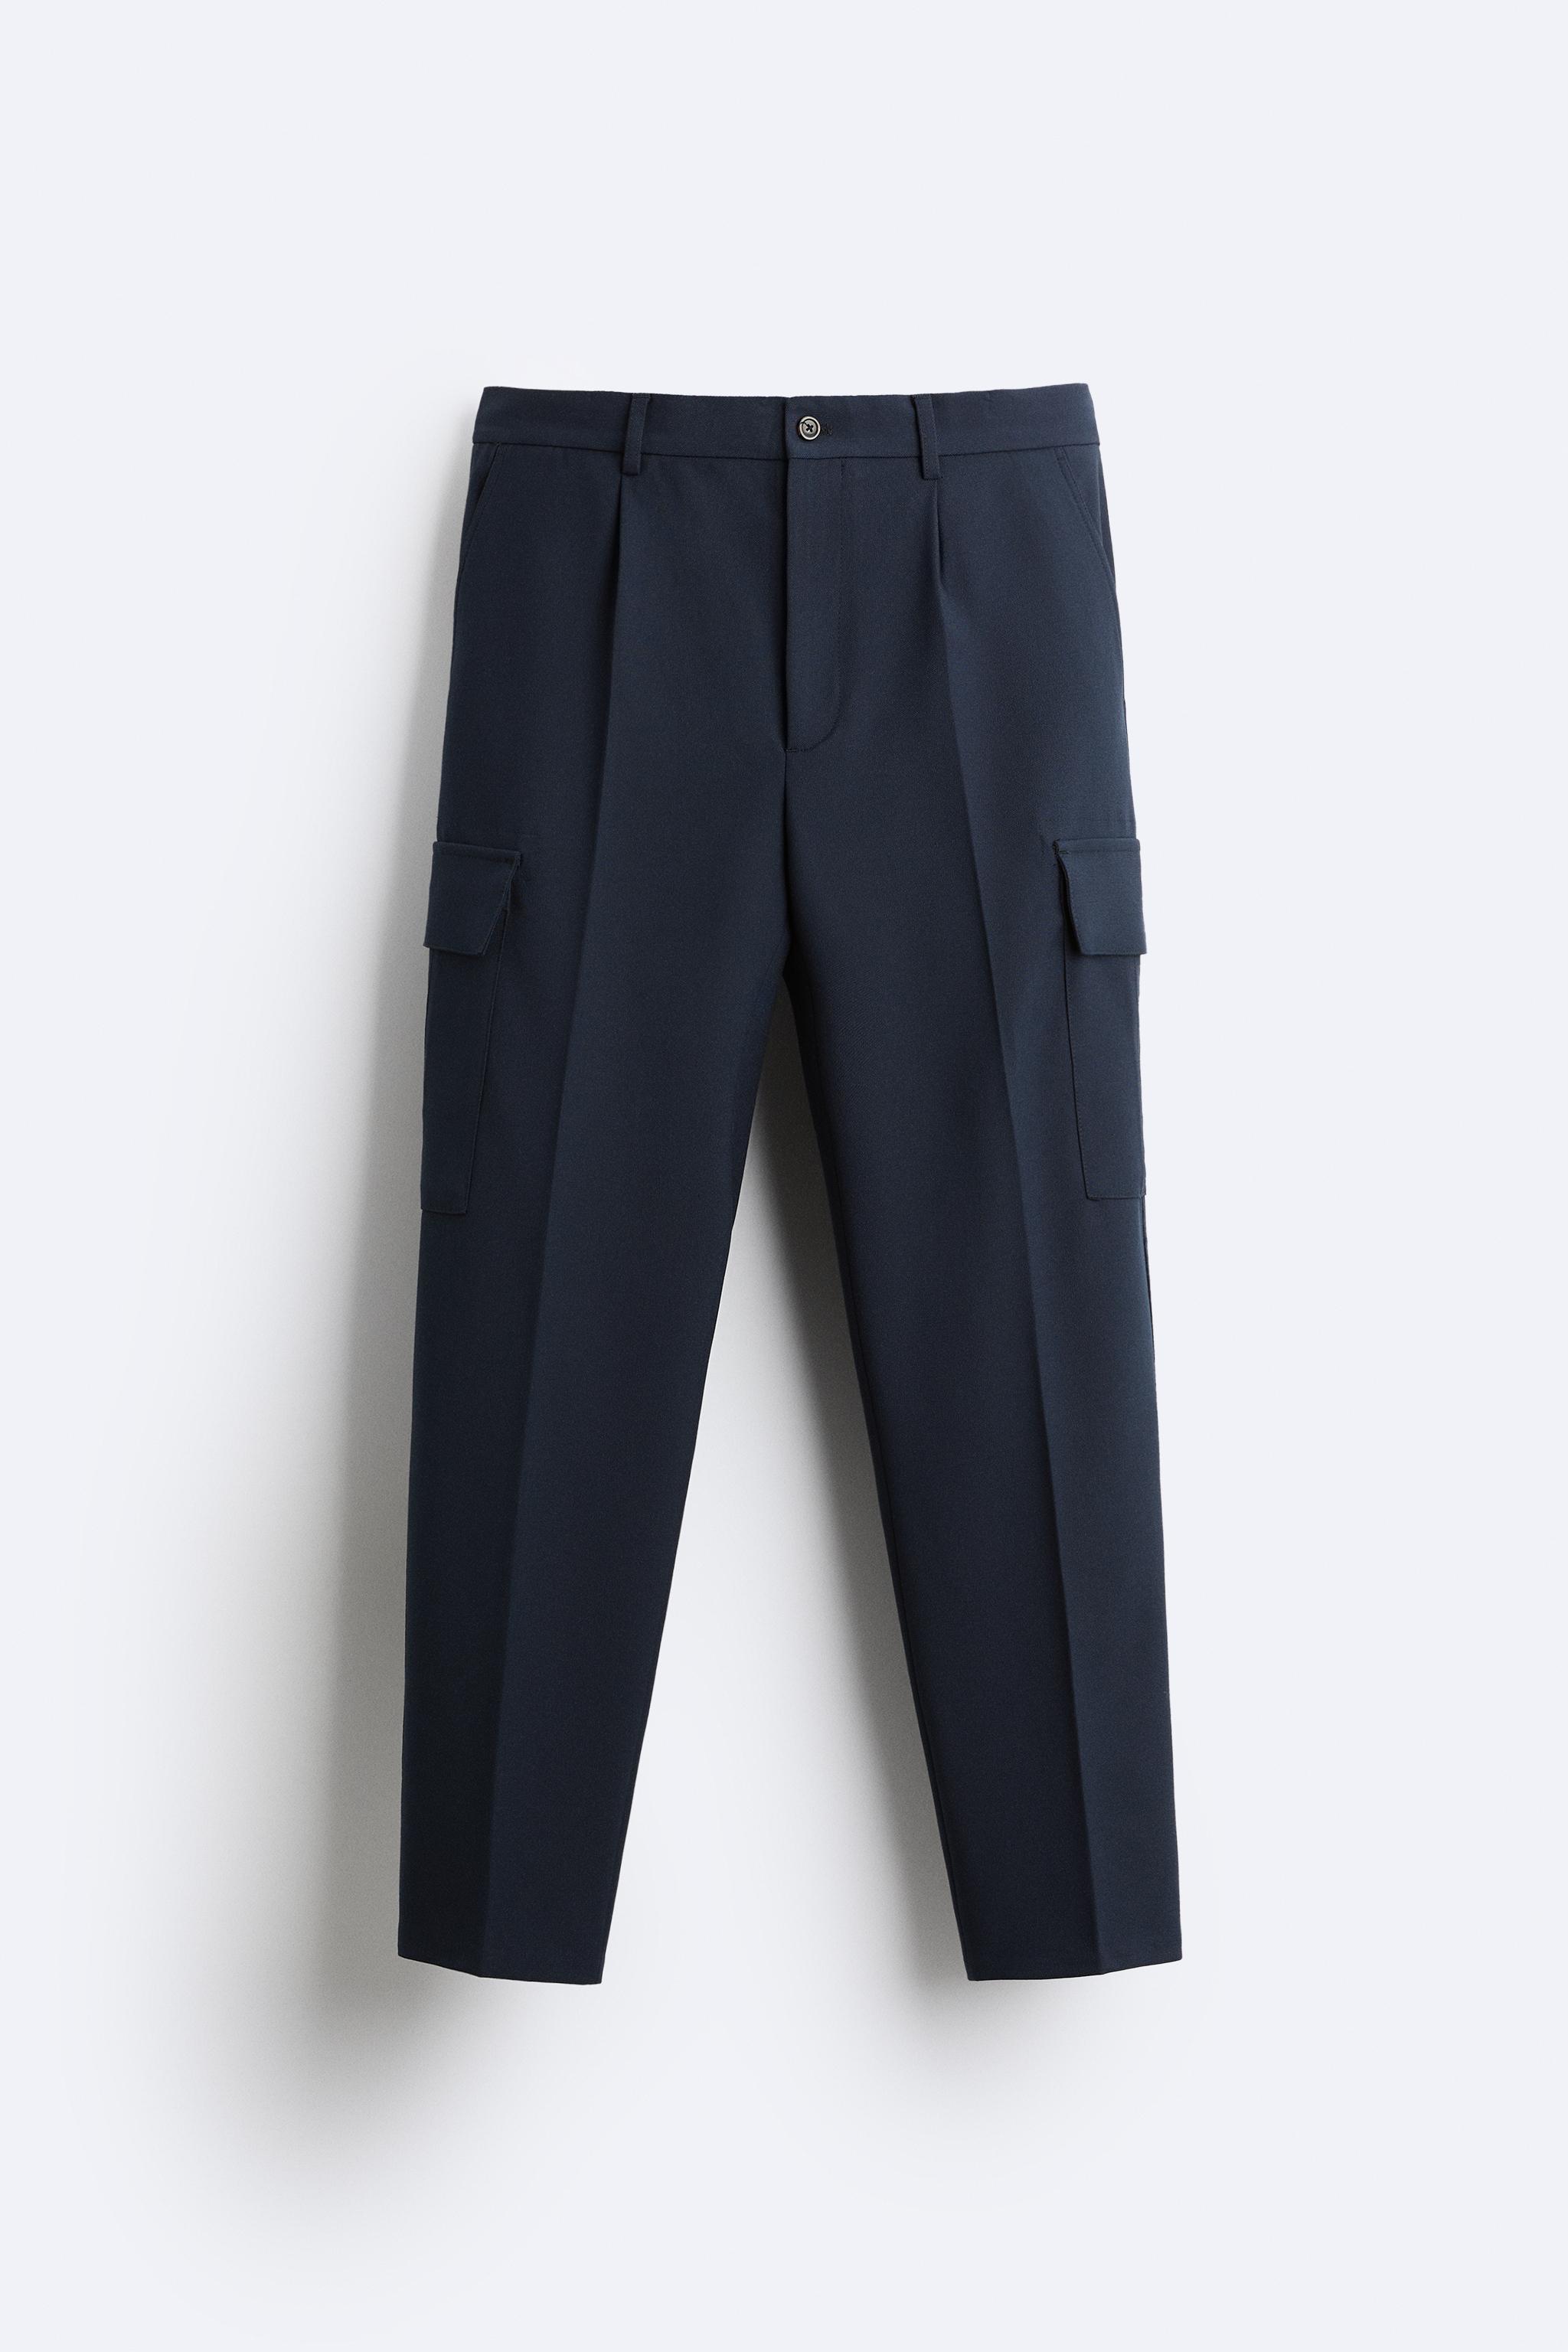 STRETCH SUIT PANTS - Green | ZARA United States